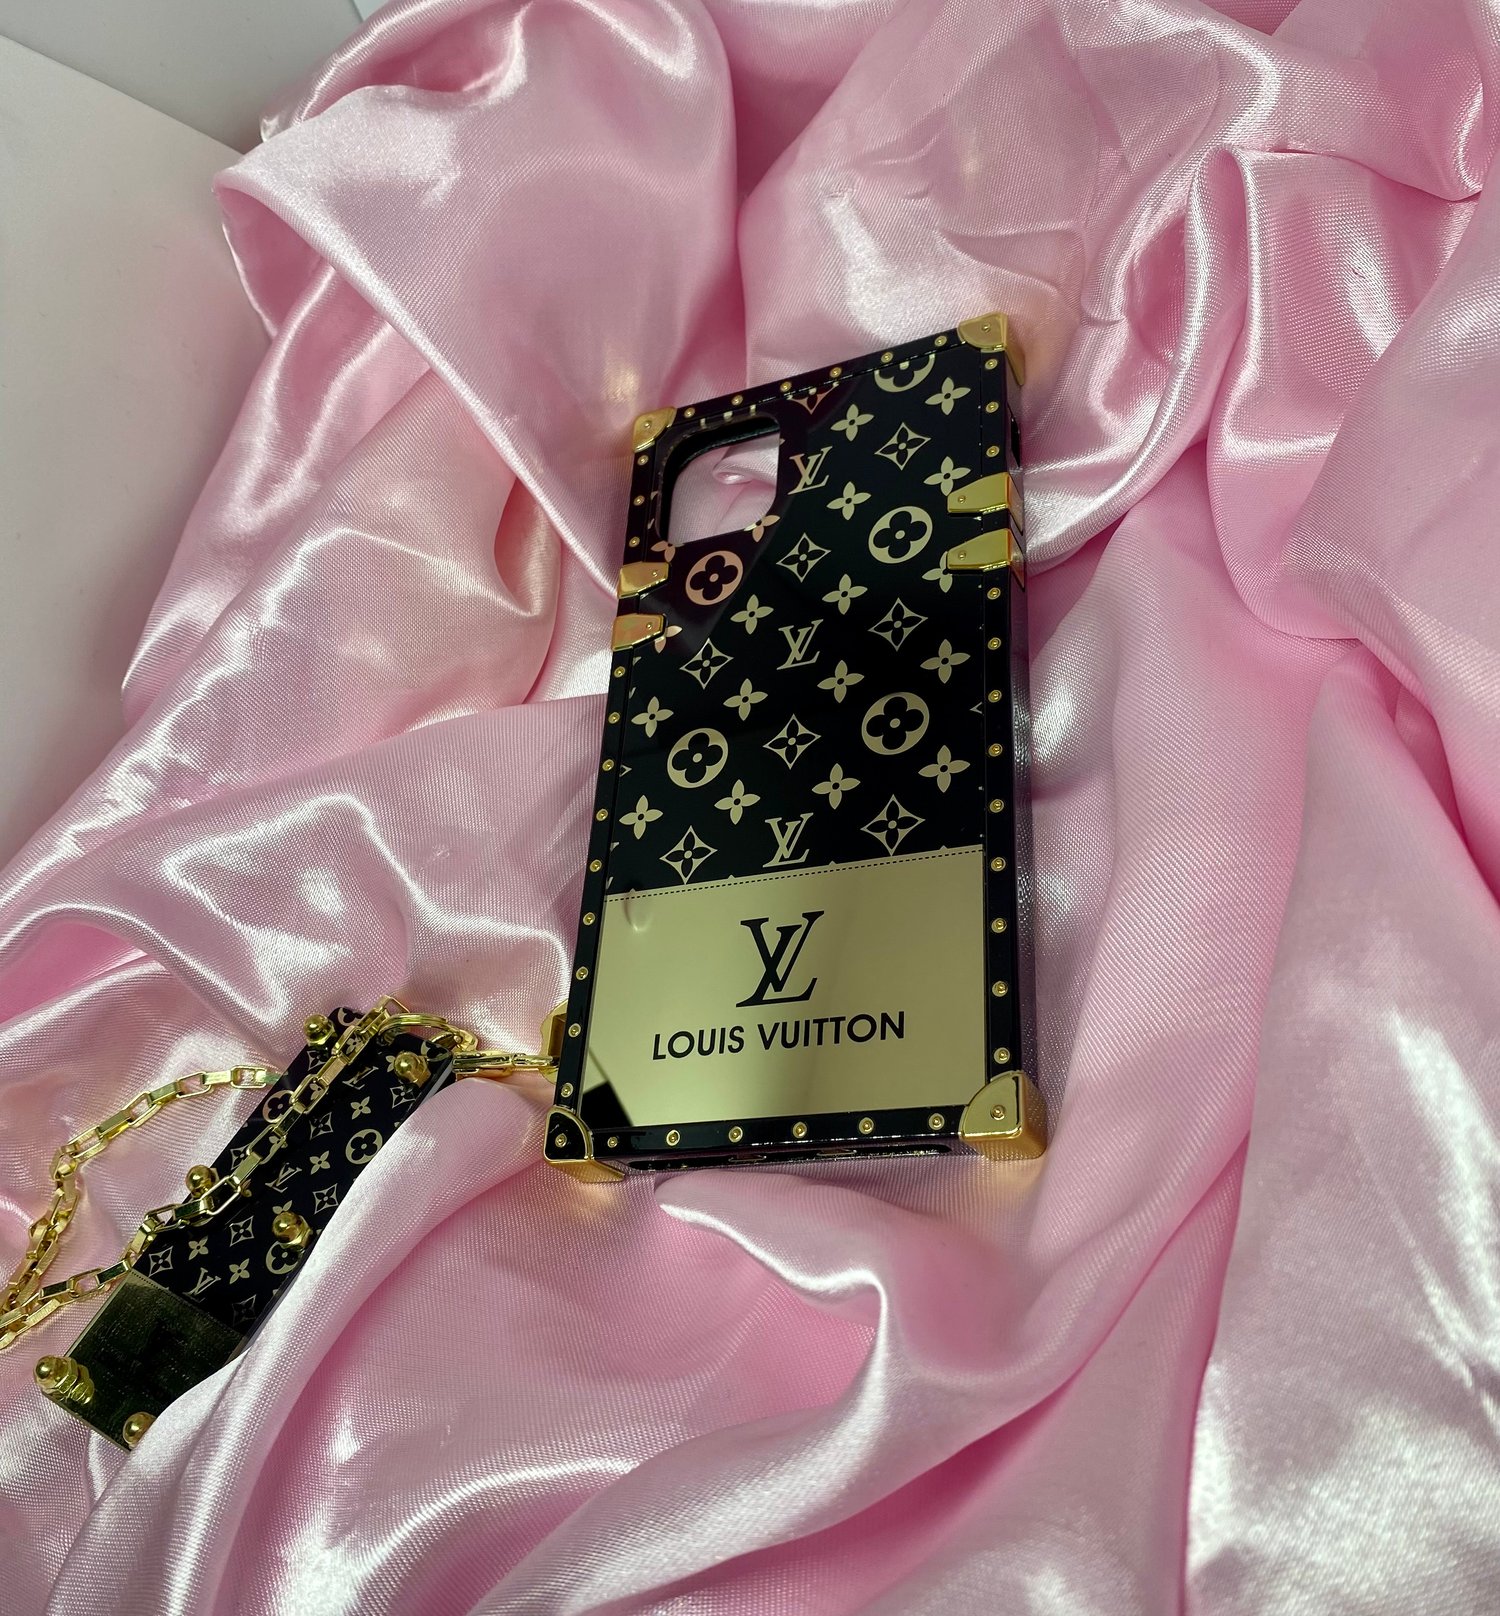 WHAT THE LV PHONE CASE